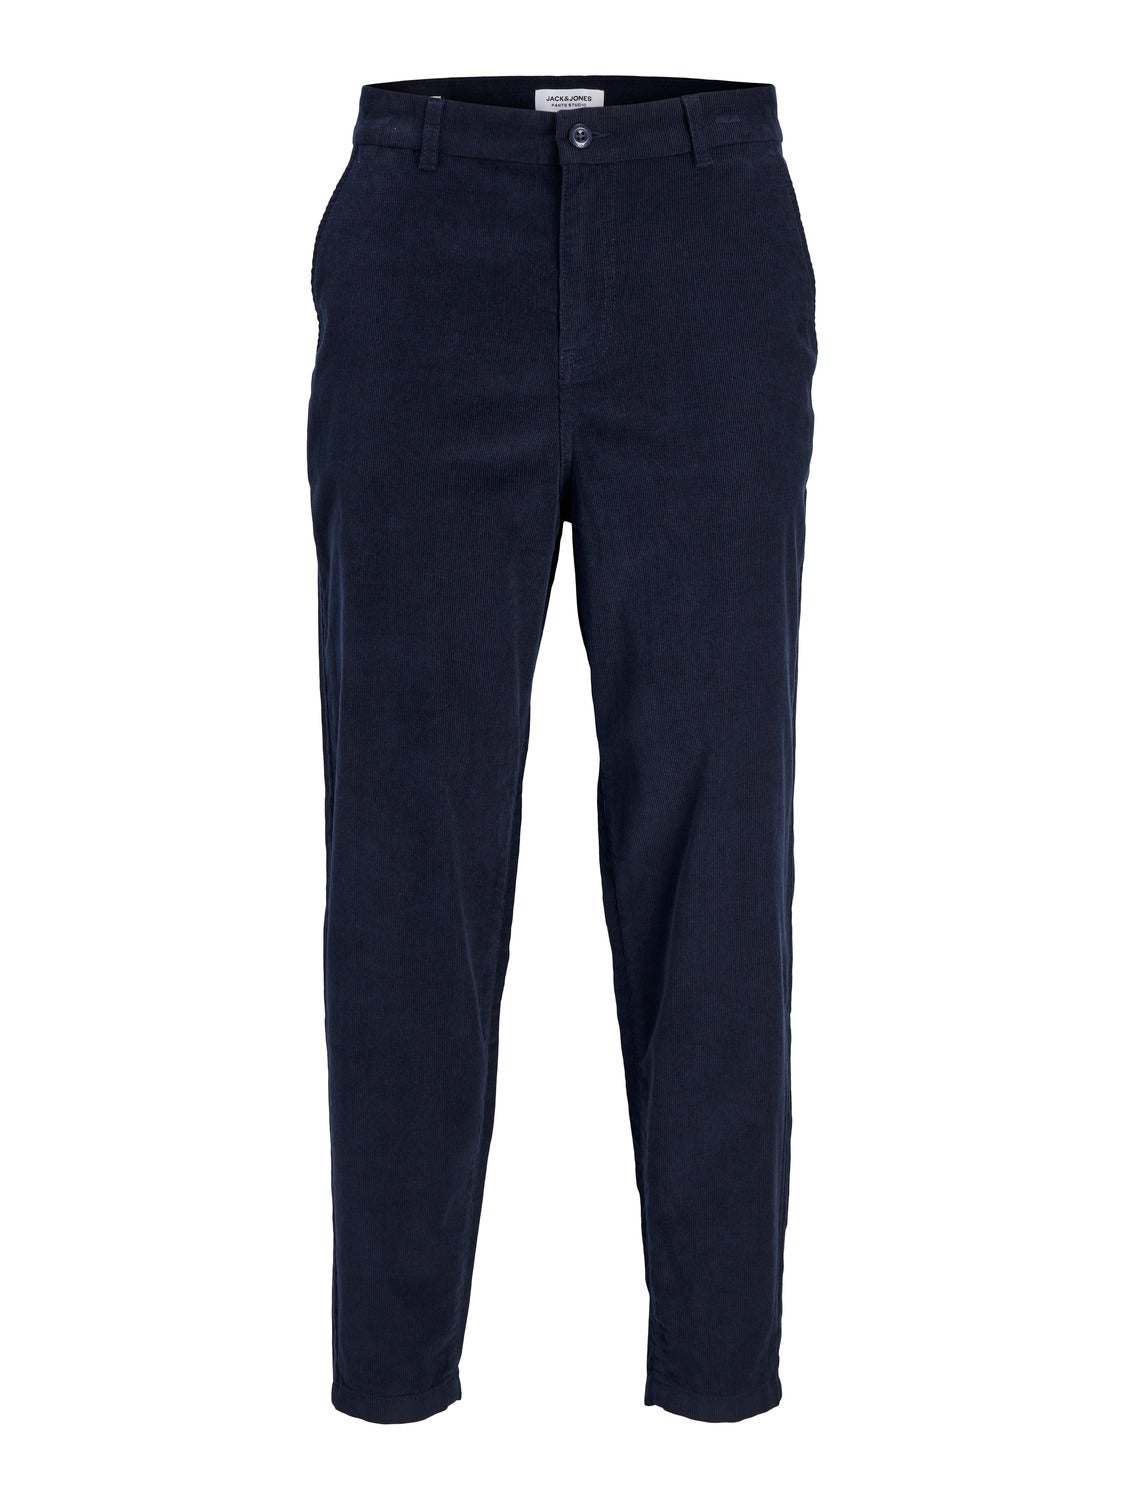 Uno loose fit tailored pants in navy – DEXISTREND